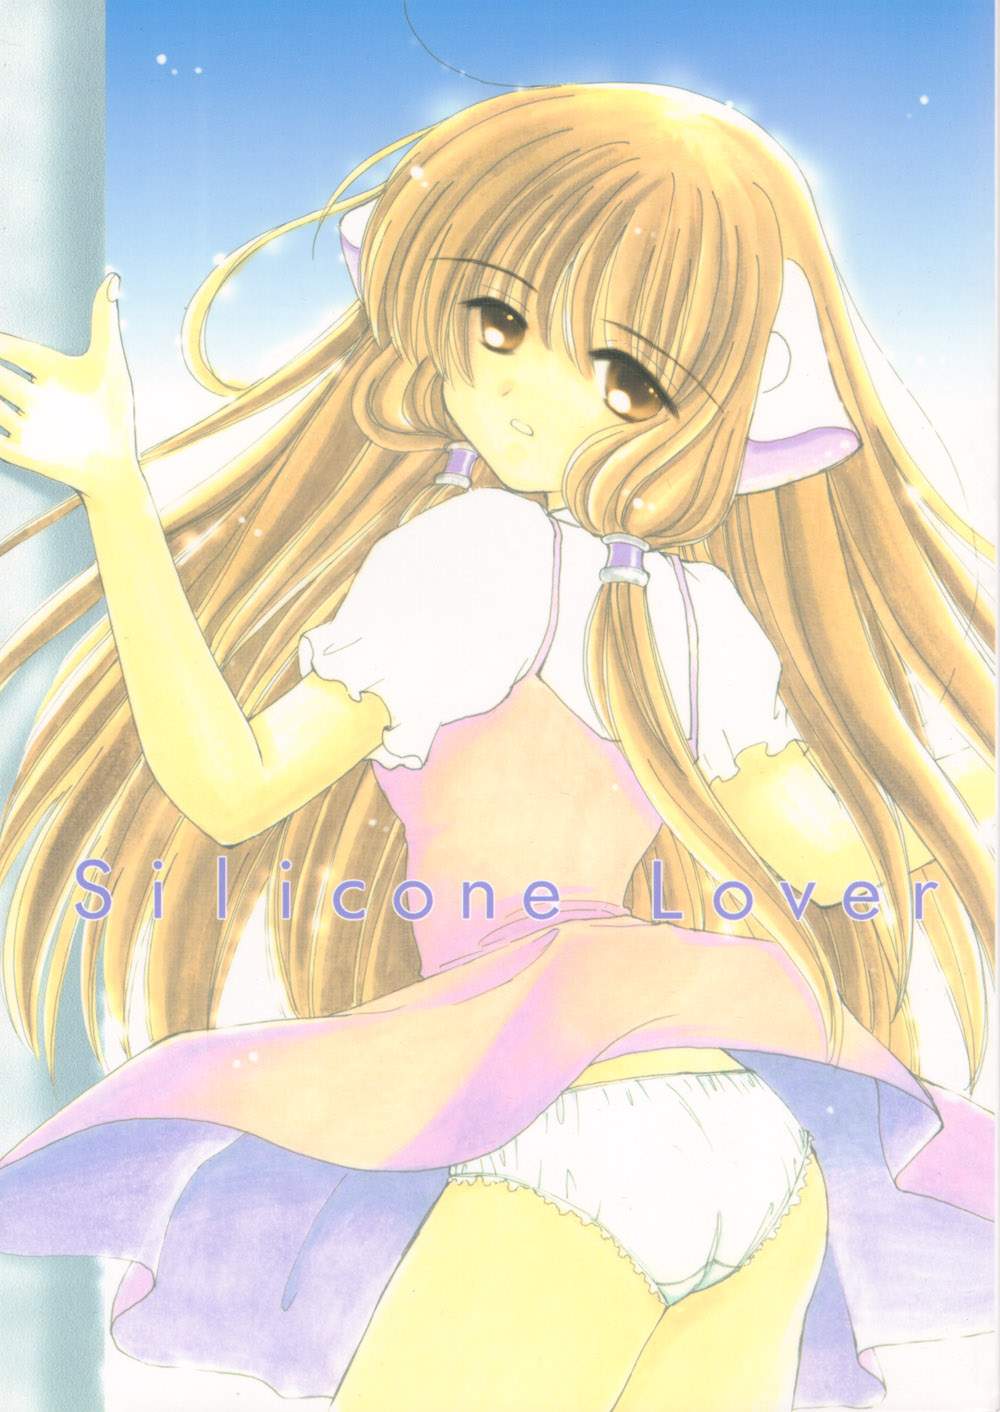 Chobits - Silicone Lover 